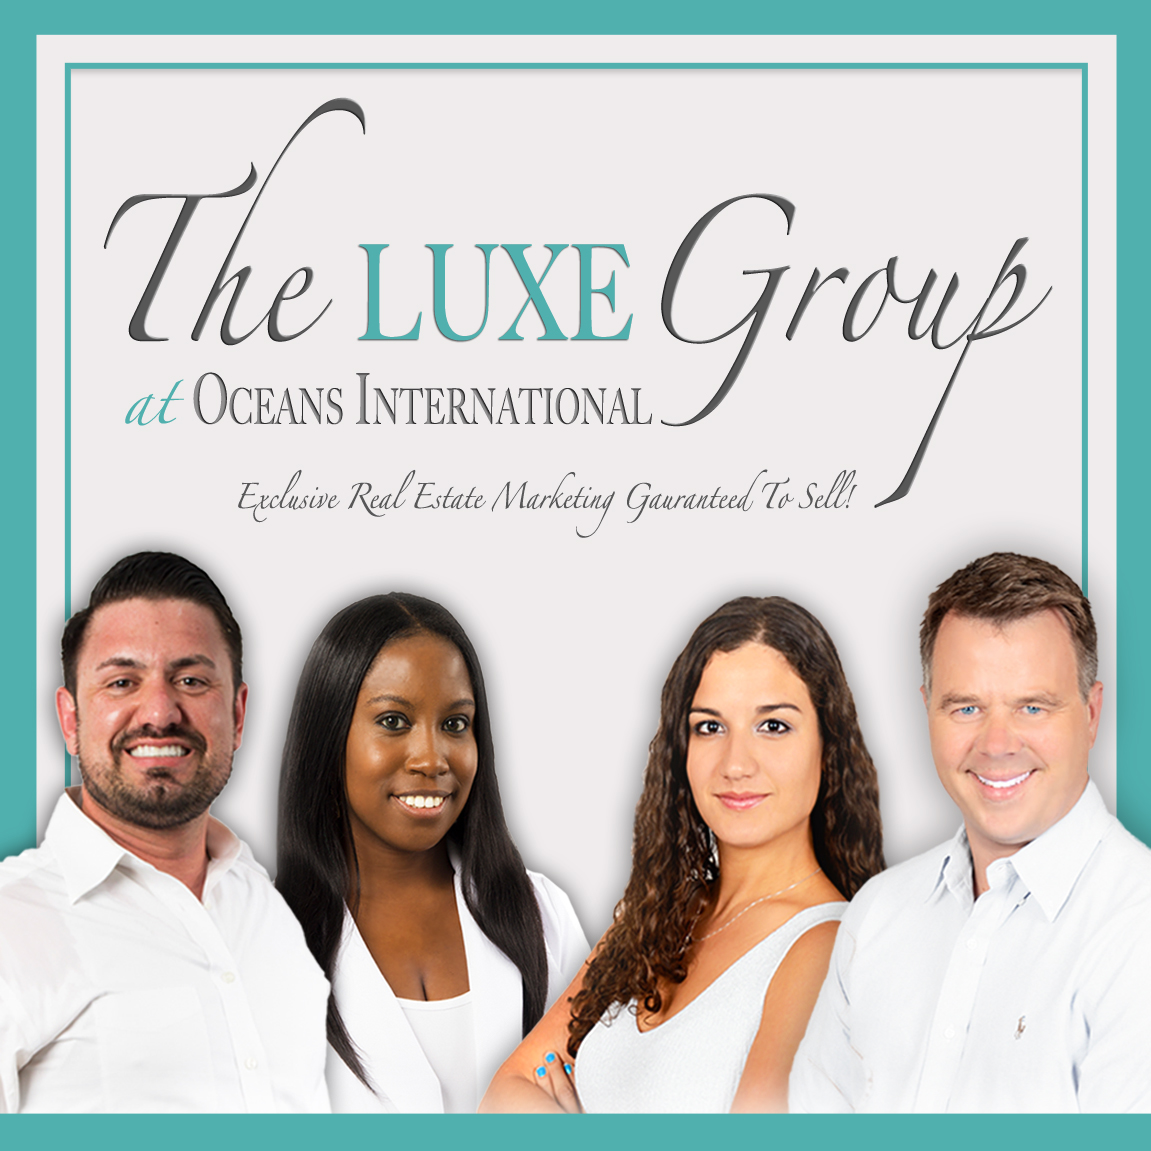 The LUXE Group Contact